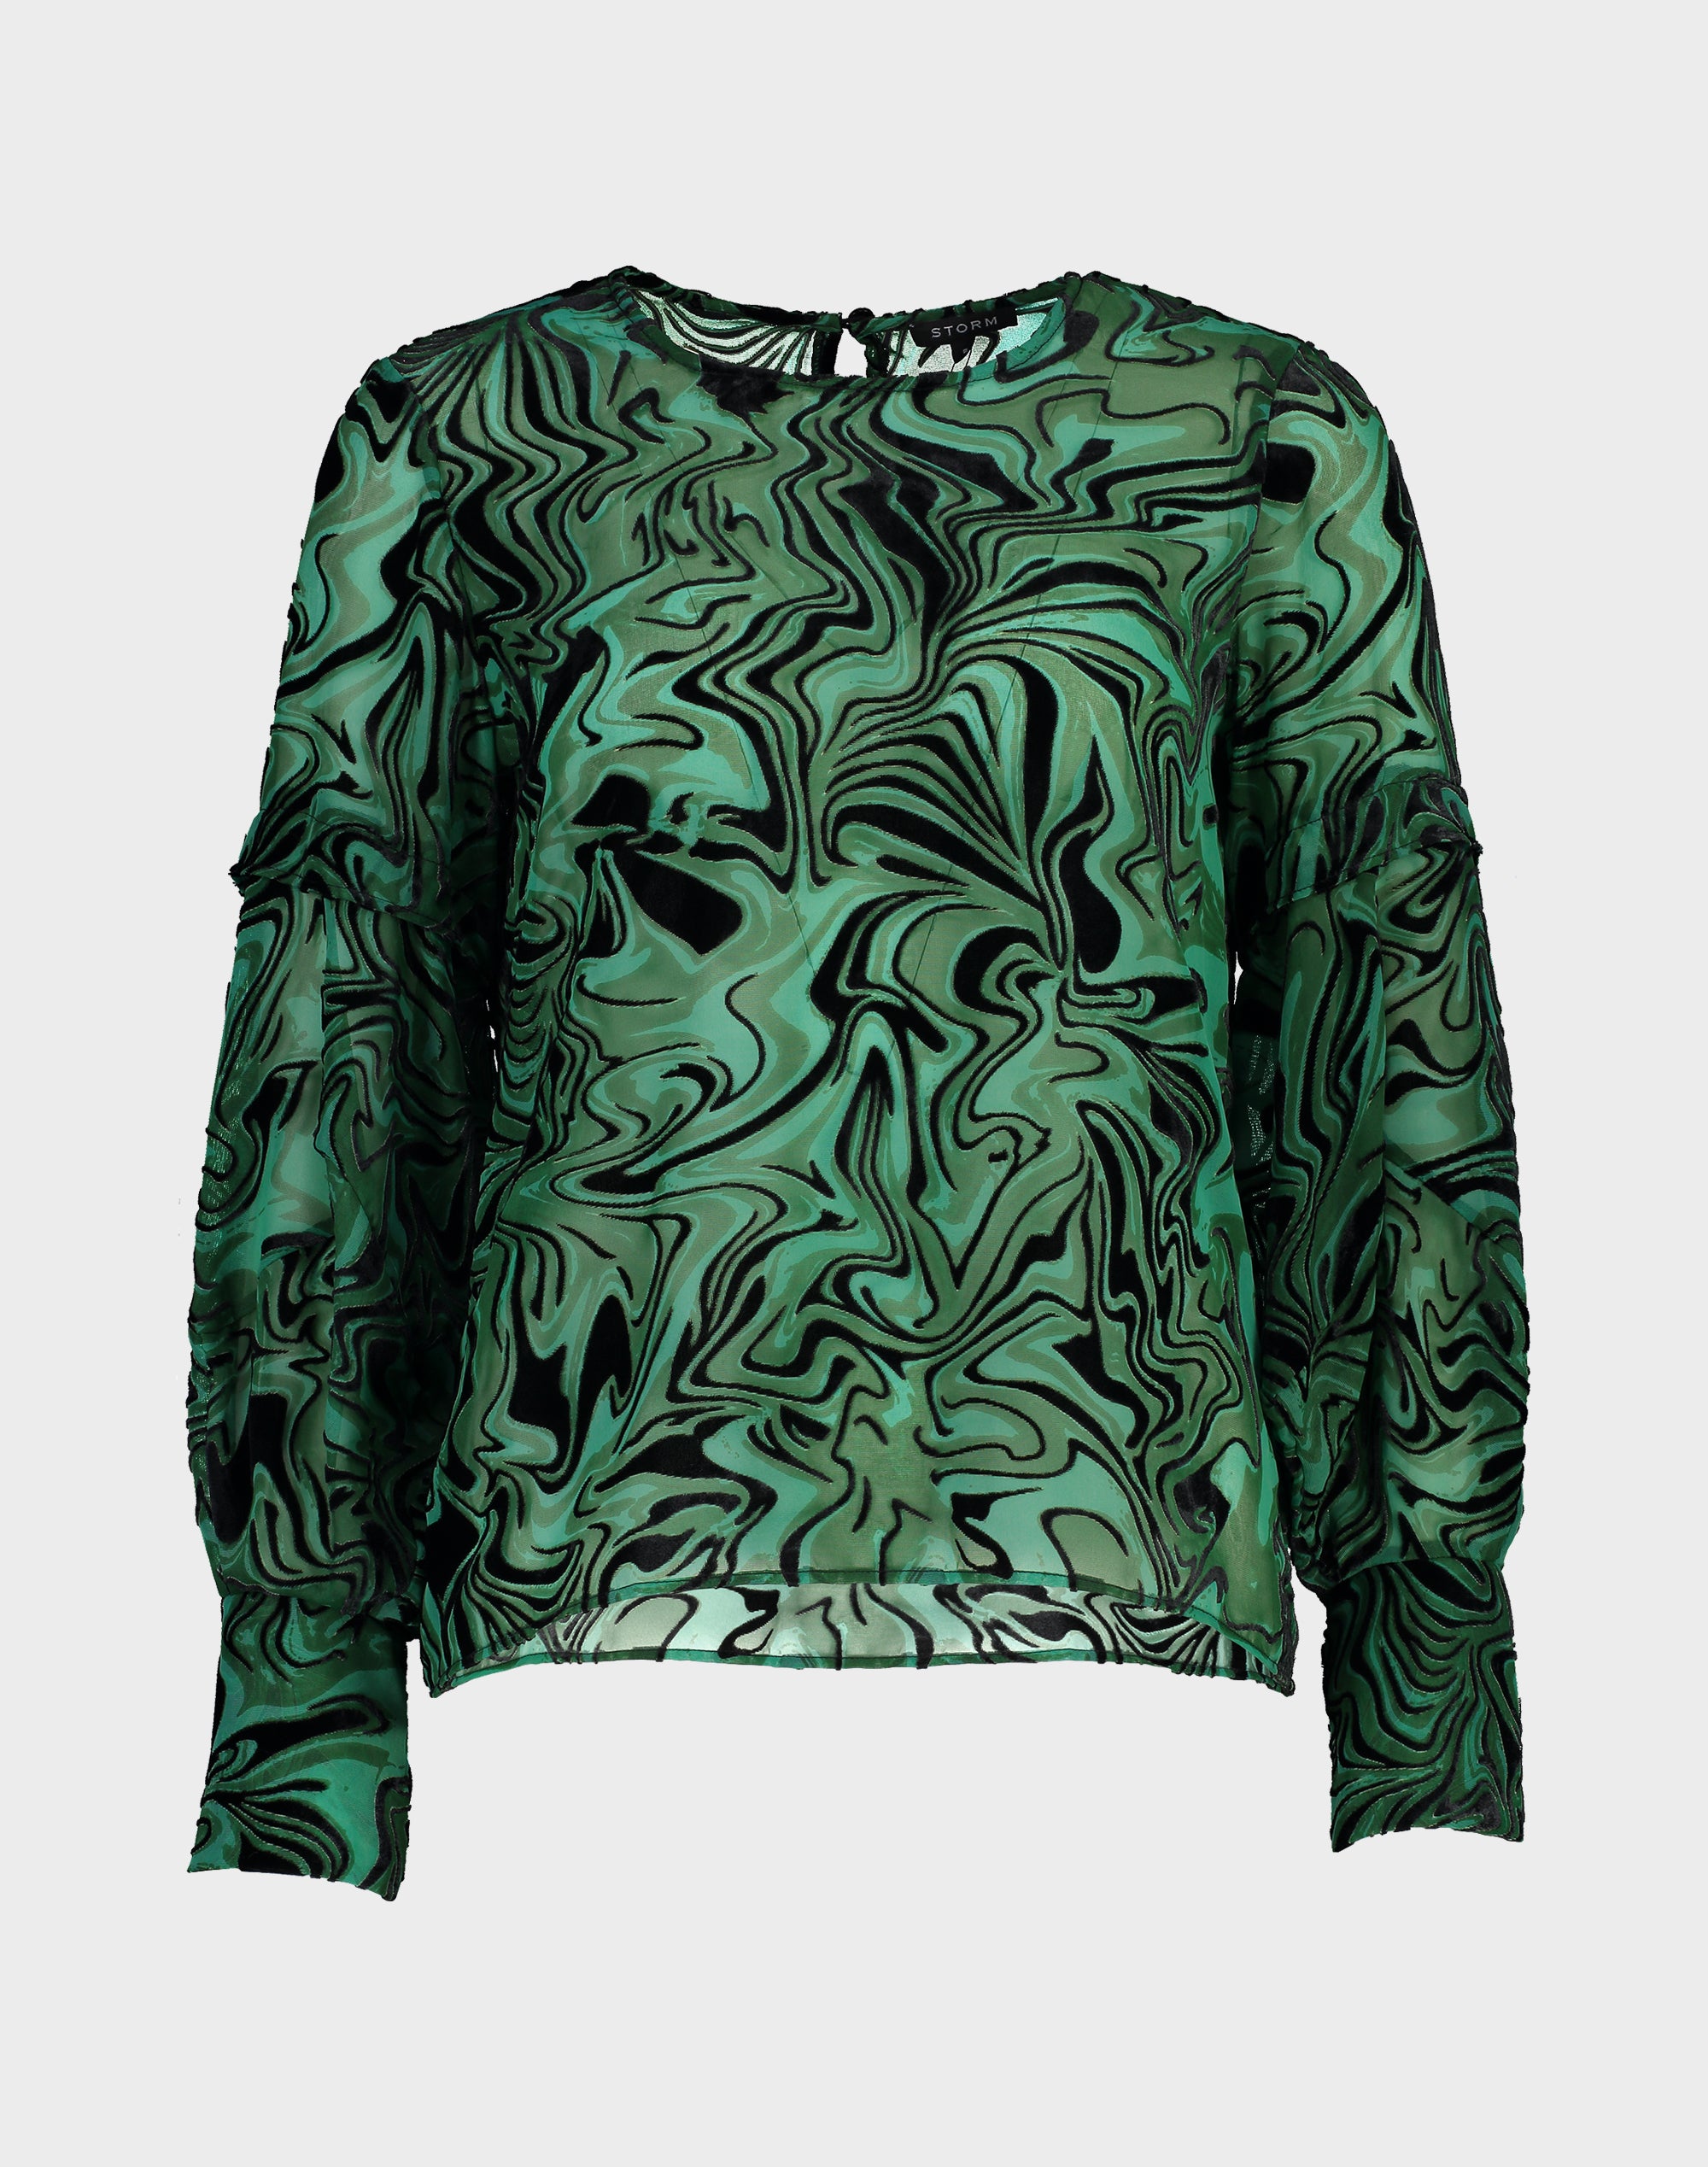 Emerald Burn Out Top